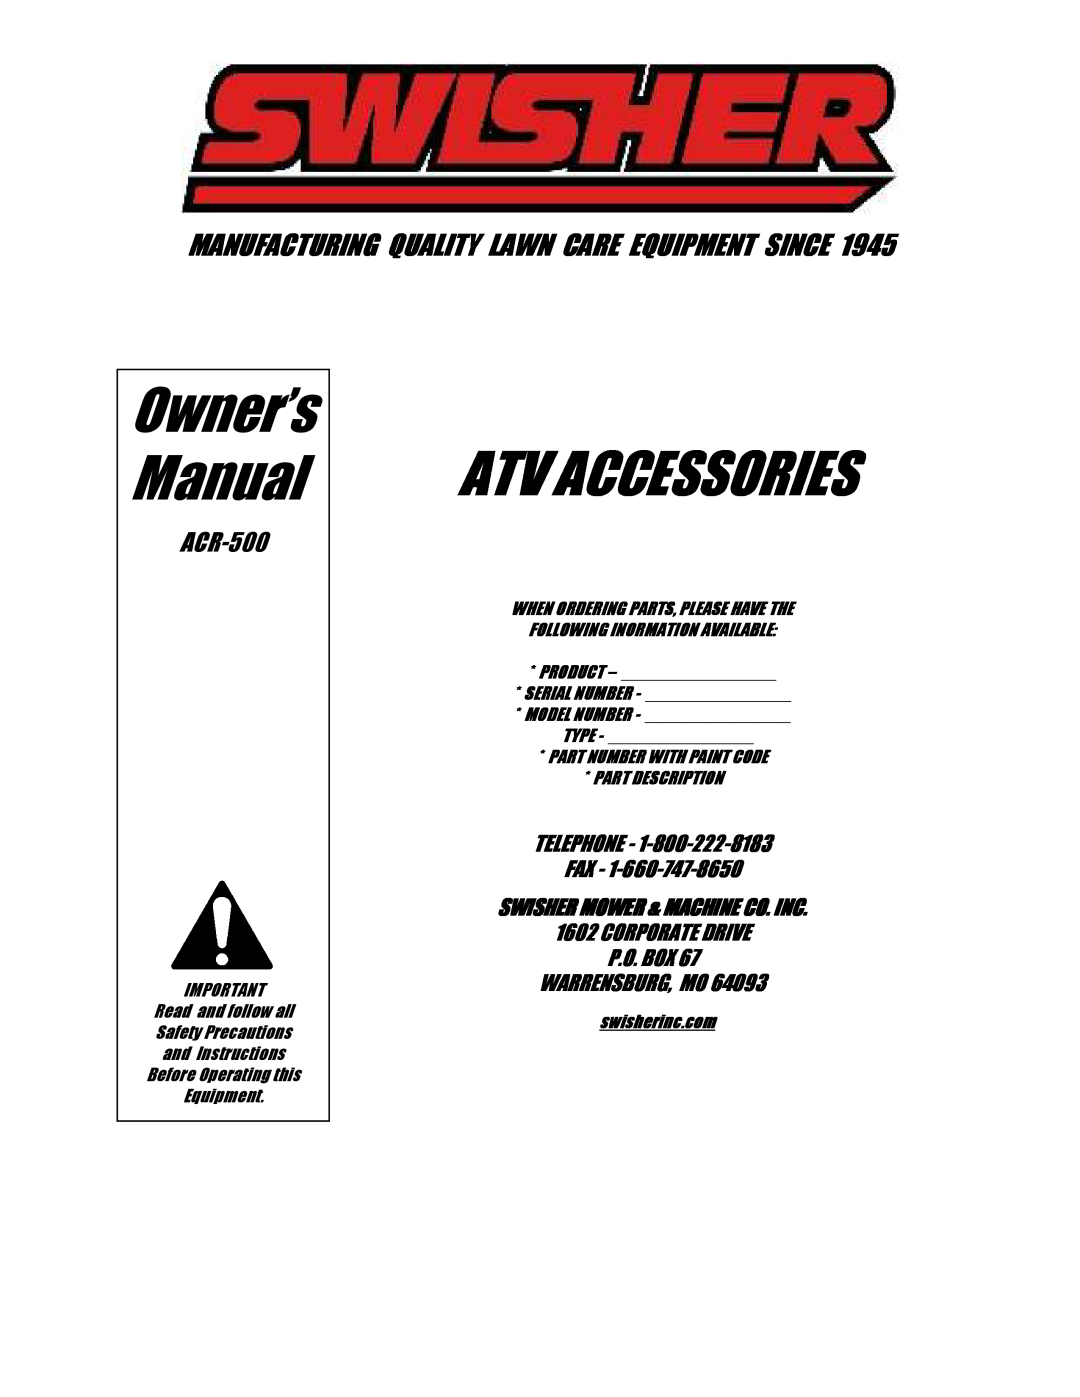 Swisher ACR-500, ACR-500S owner manual Atv Accessories, Manufacturing Quality Lawn Care Equipment Since, Telephone - Fax 